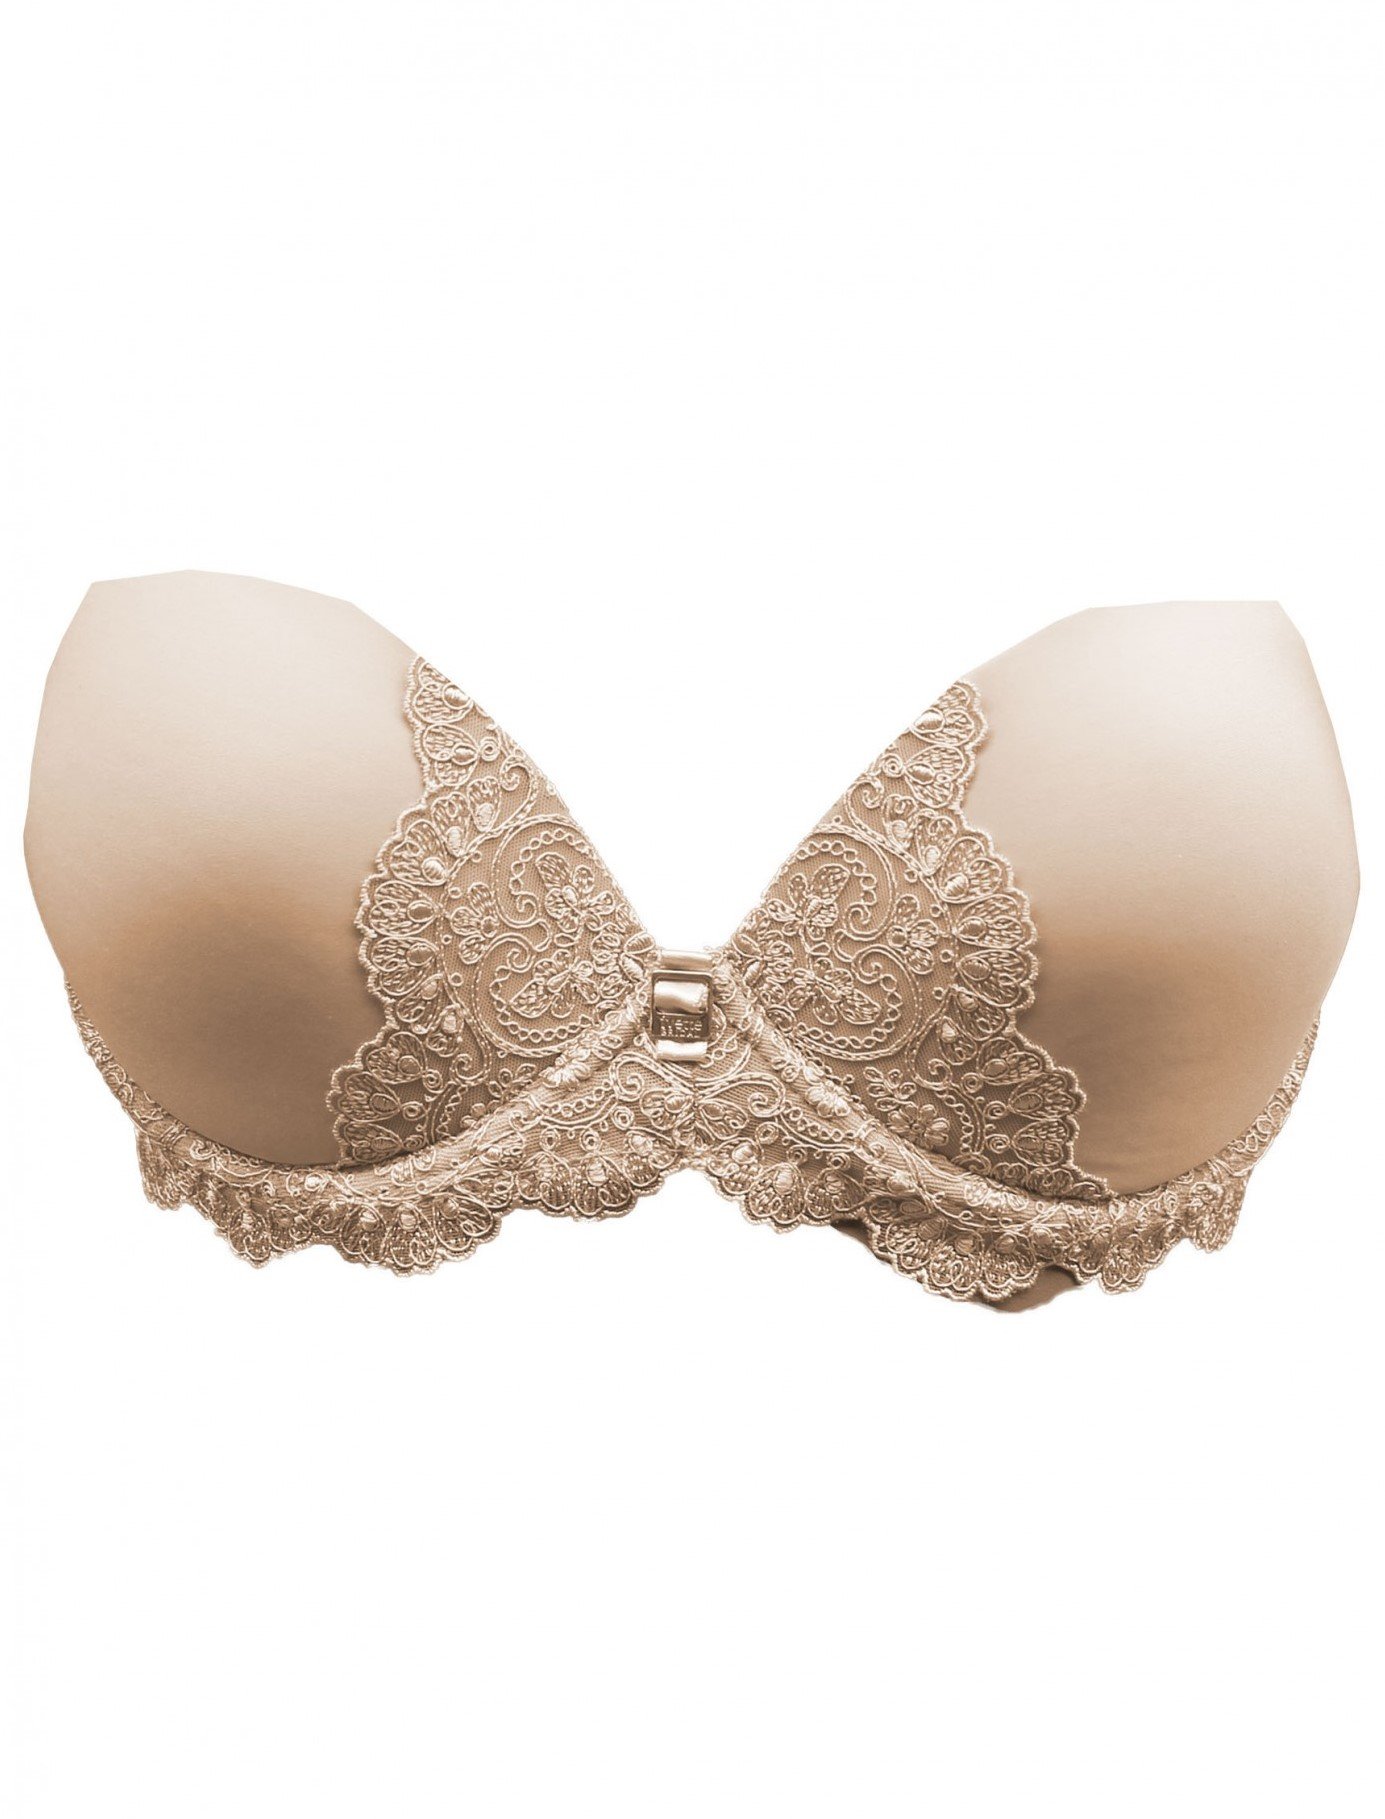 Heritage Nude Strapless Low-Cut Neckline Bra with Push Up